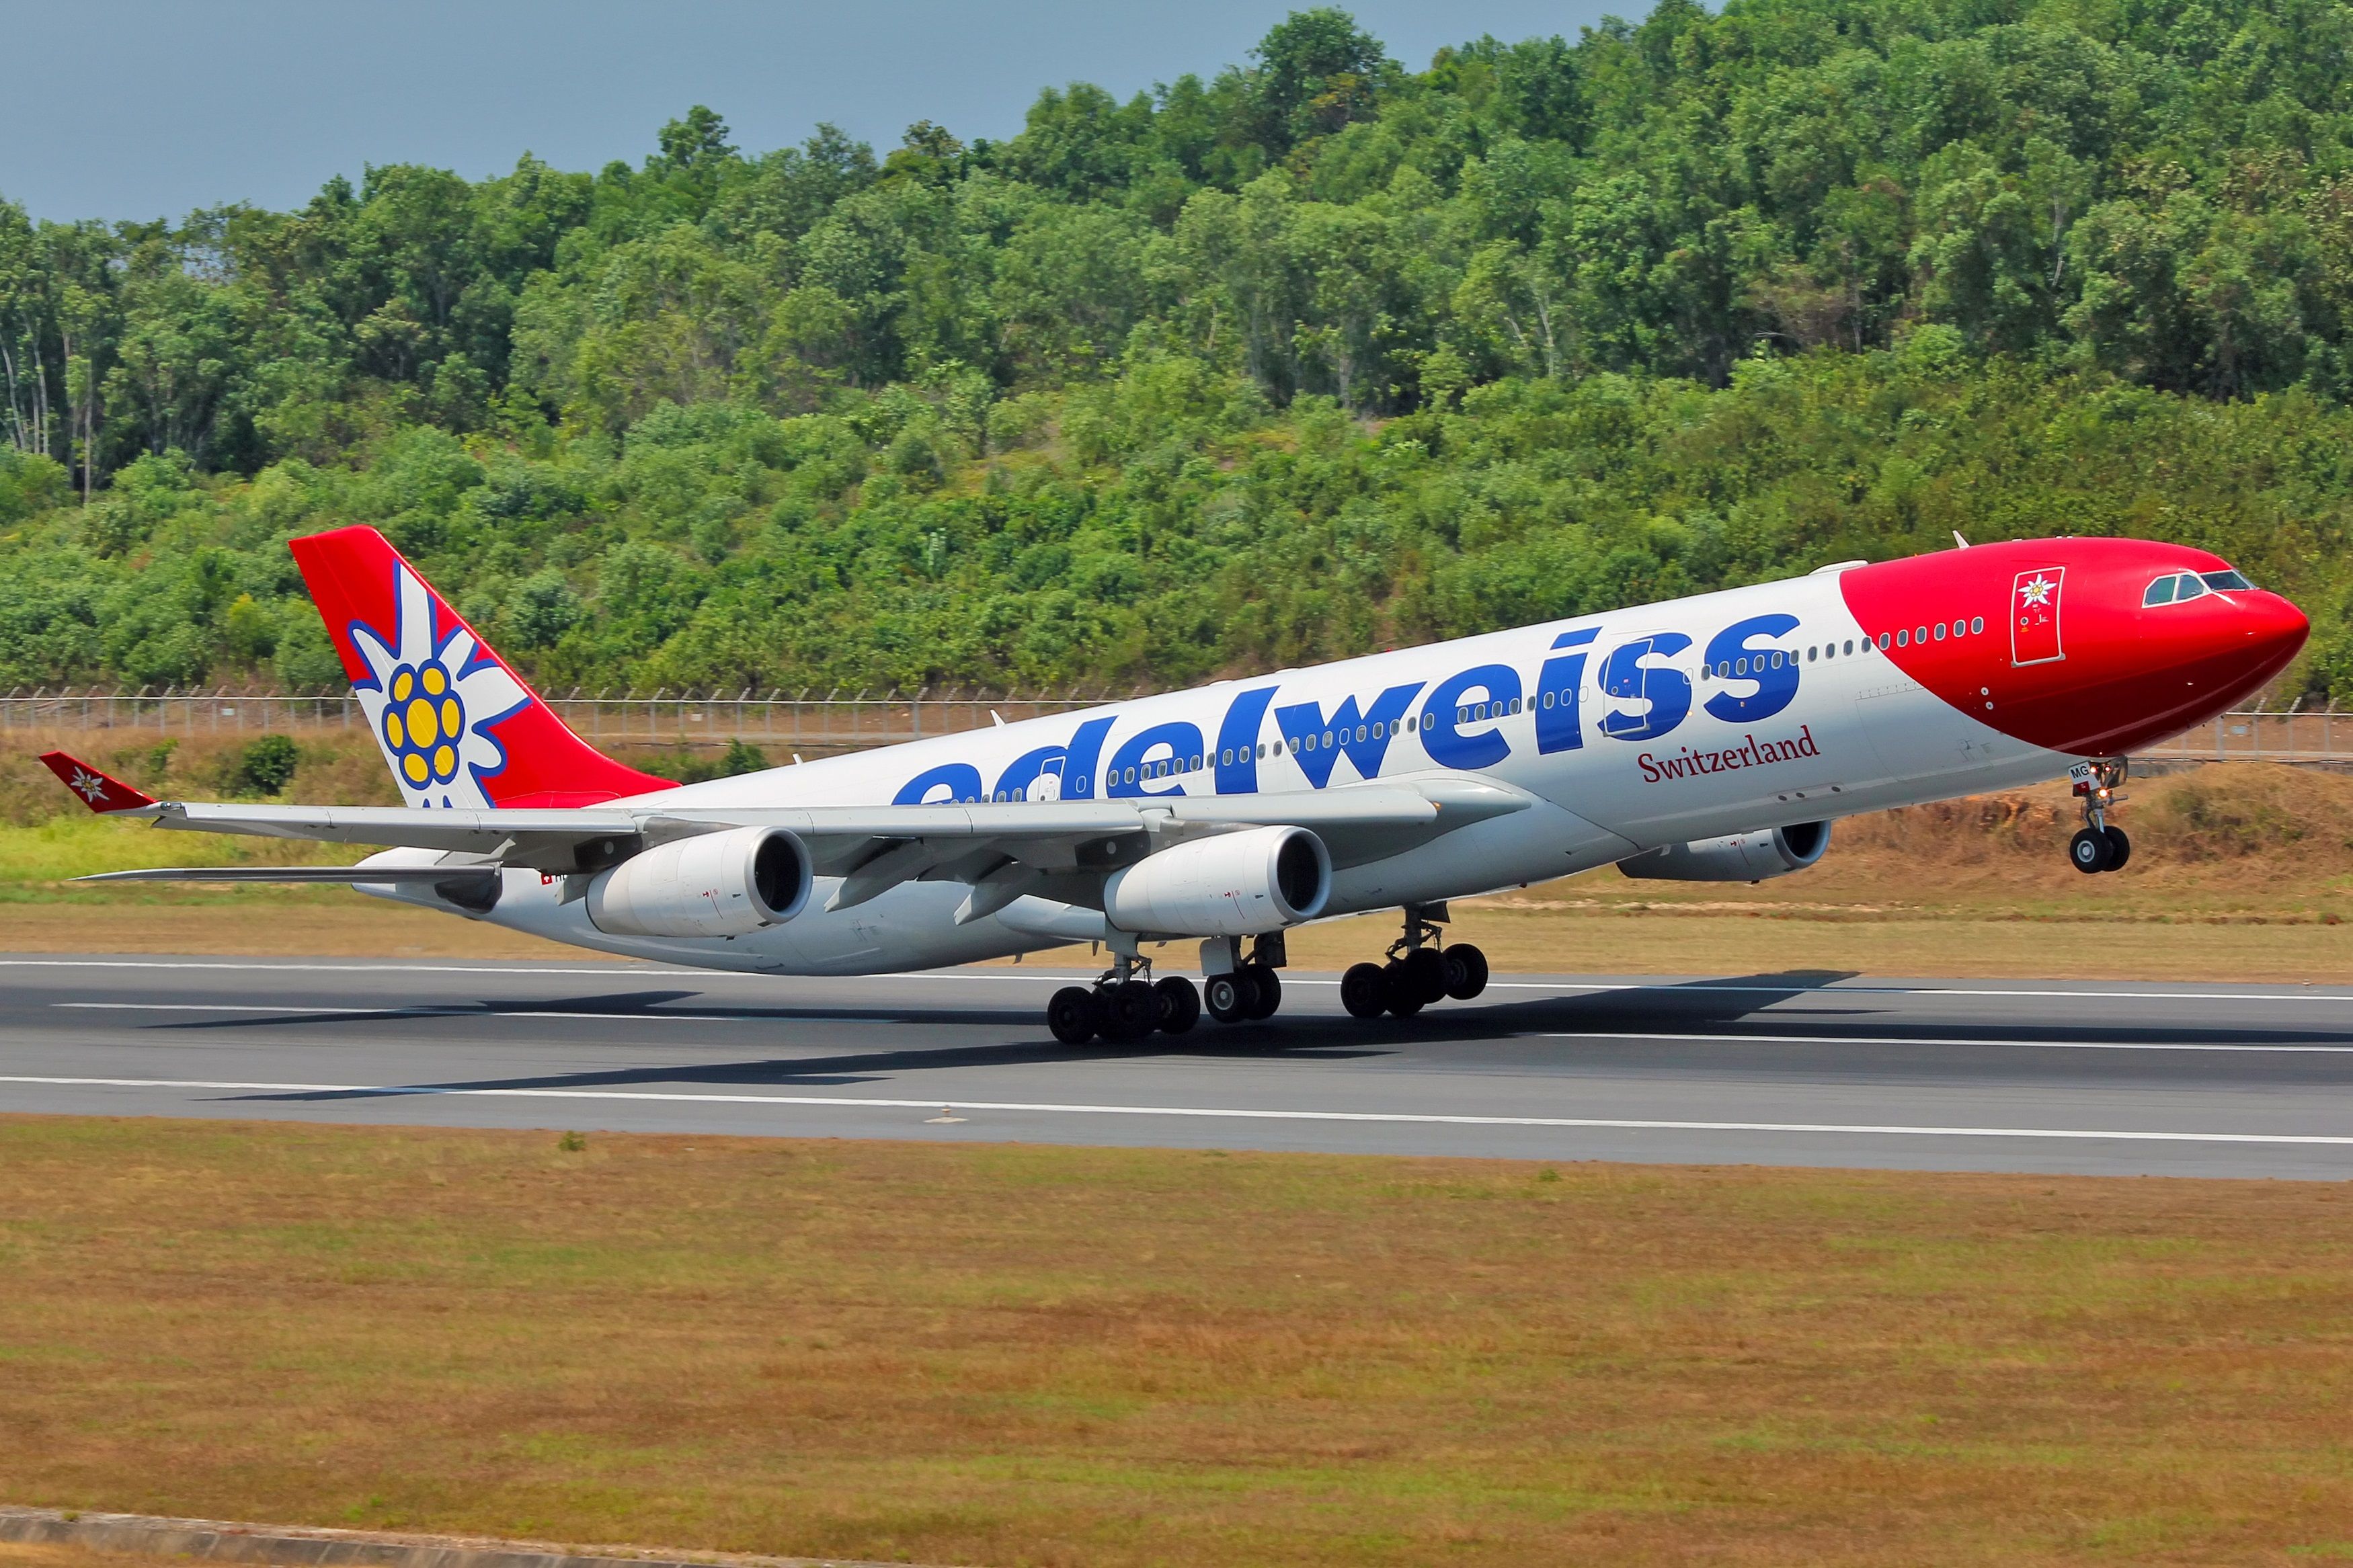 Edelweiss Airbus A340-300